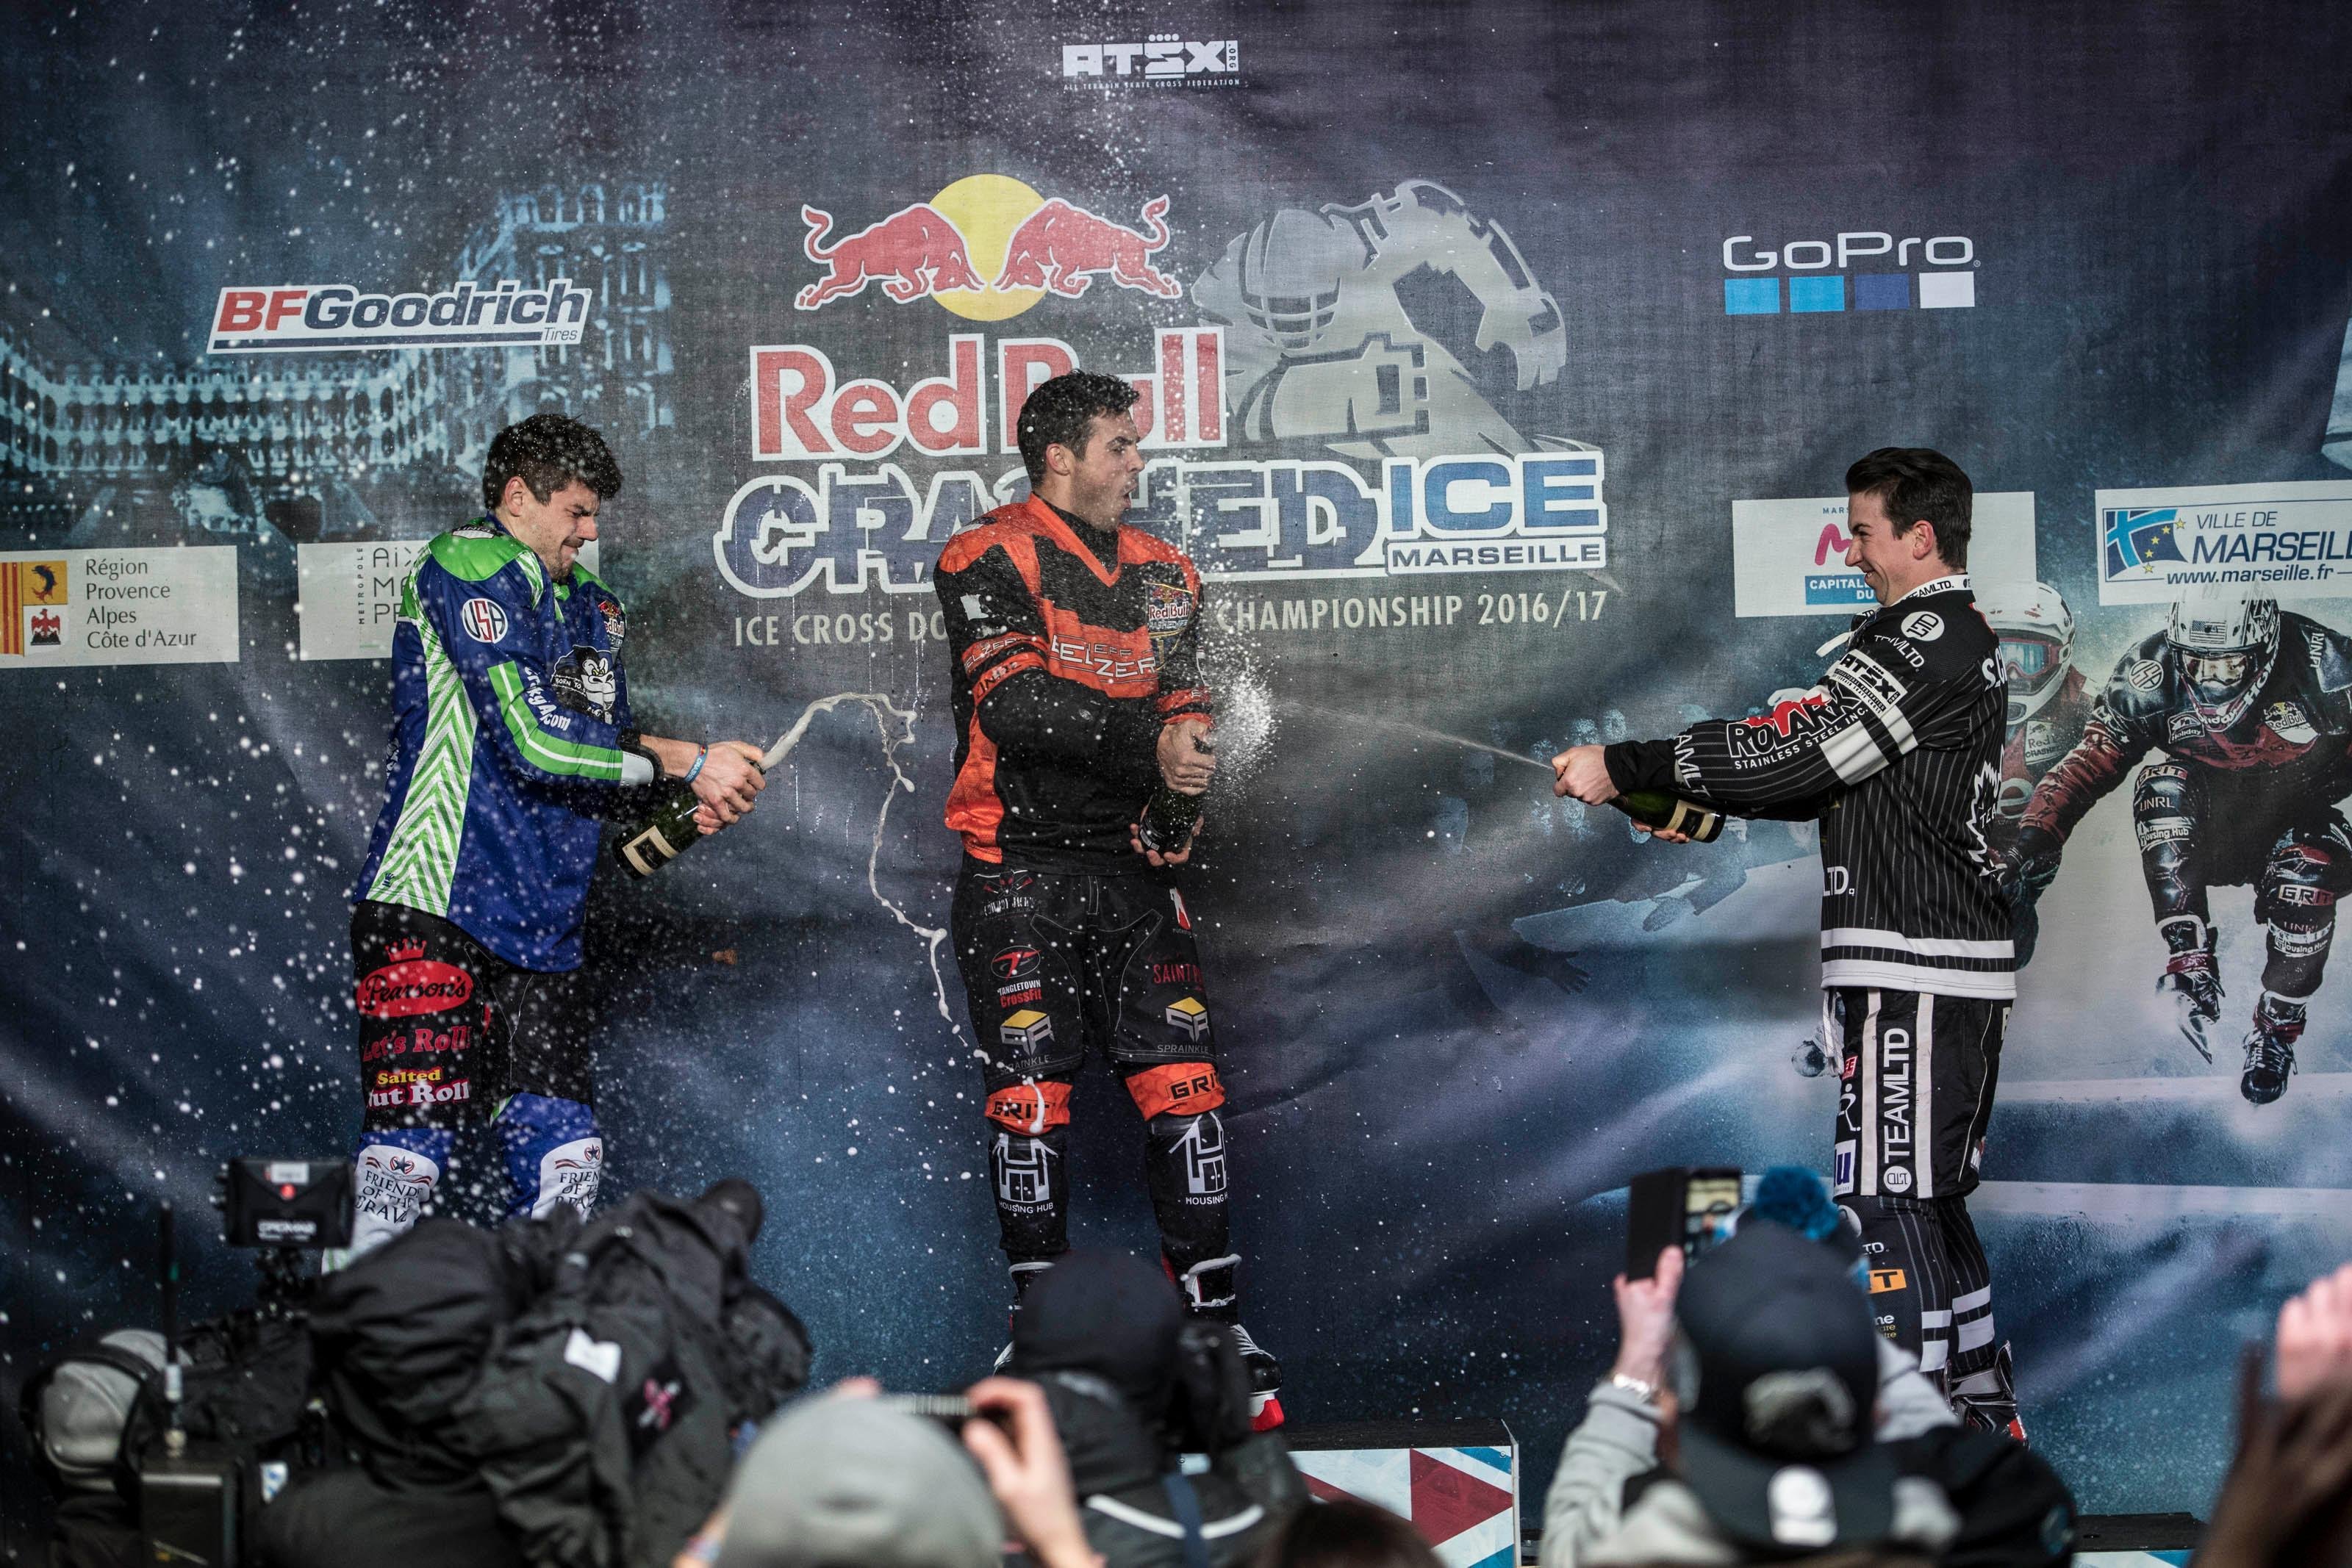 Cameron Naasz of the United States (C) celebrates with Maxwell Dunne of the United States (L) and Scott Croxall of Canada (R) during the Award Ceremony at the first stage of the ATSX Ice Cross Downhill World Championship at the Red Bull Crashed Ice in Marseille, France on January 14, 2017.